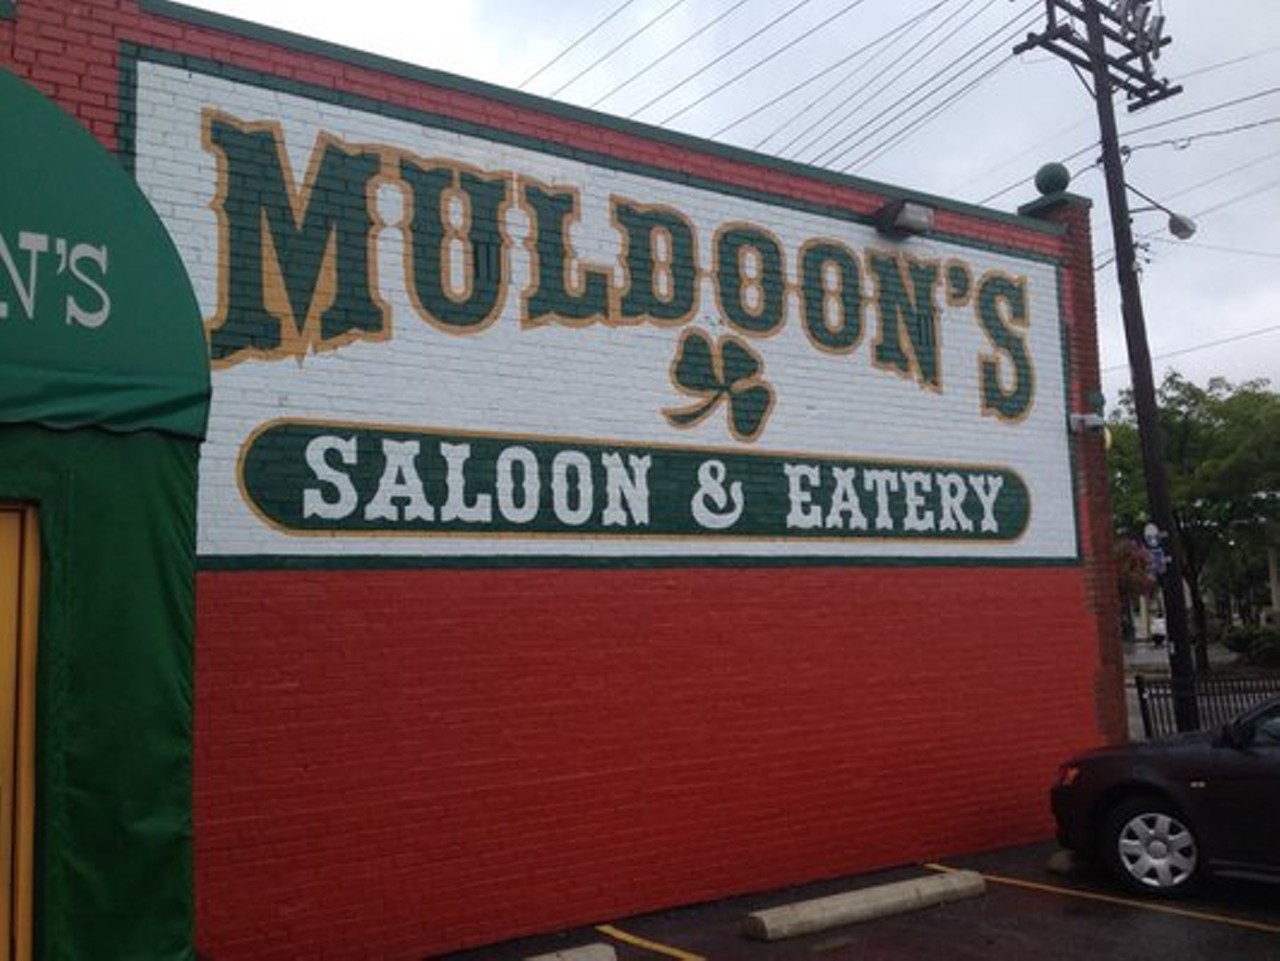  Muldoon's Saloon & Eatery
1020 E. 185th St.
This very cool authentic Irish Pub, located on the Cleveland/Euclid border, delivers a serious family-friendly St. Pat's party. 
Photo via Facebook